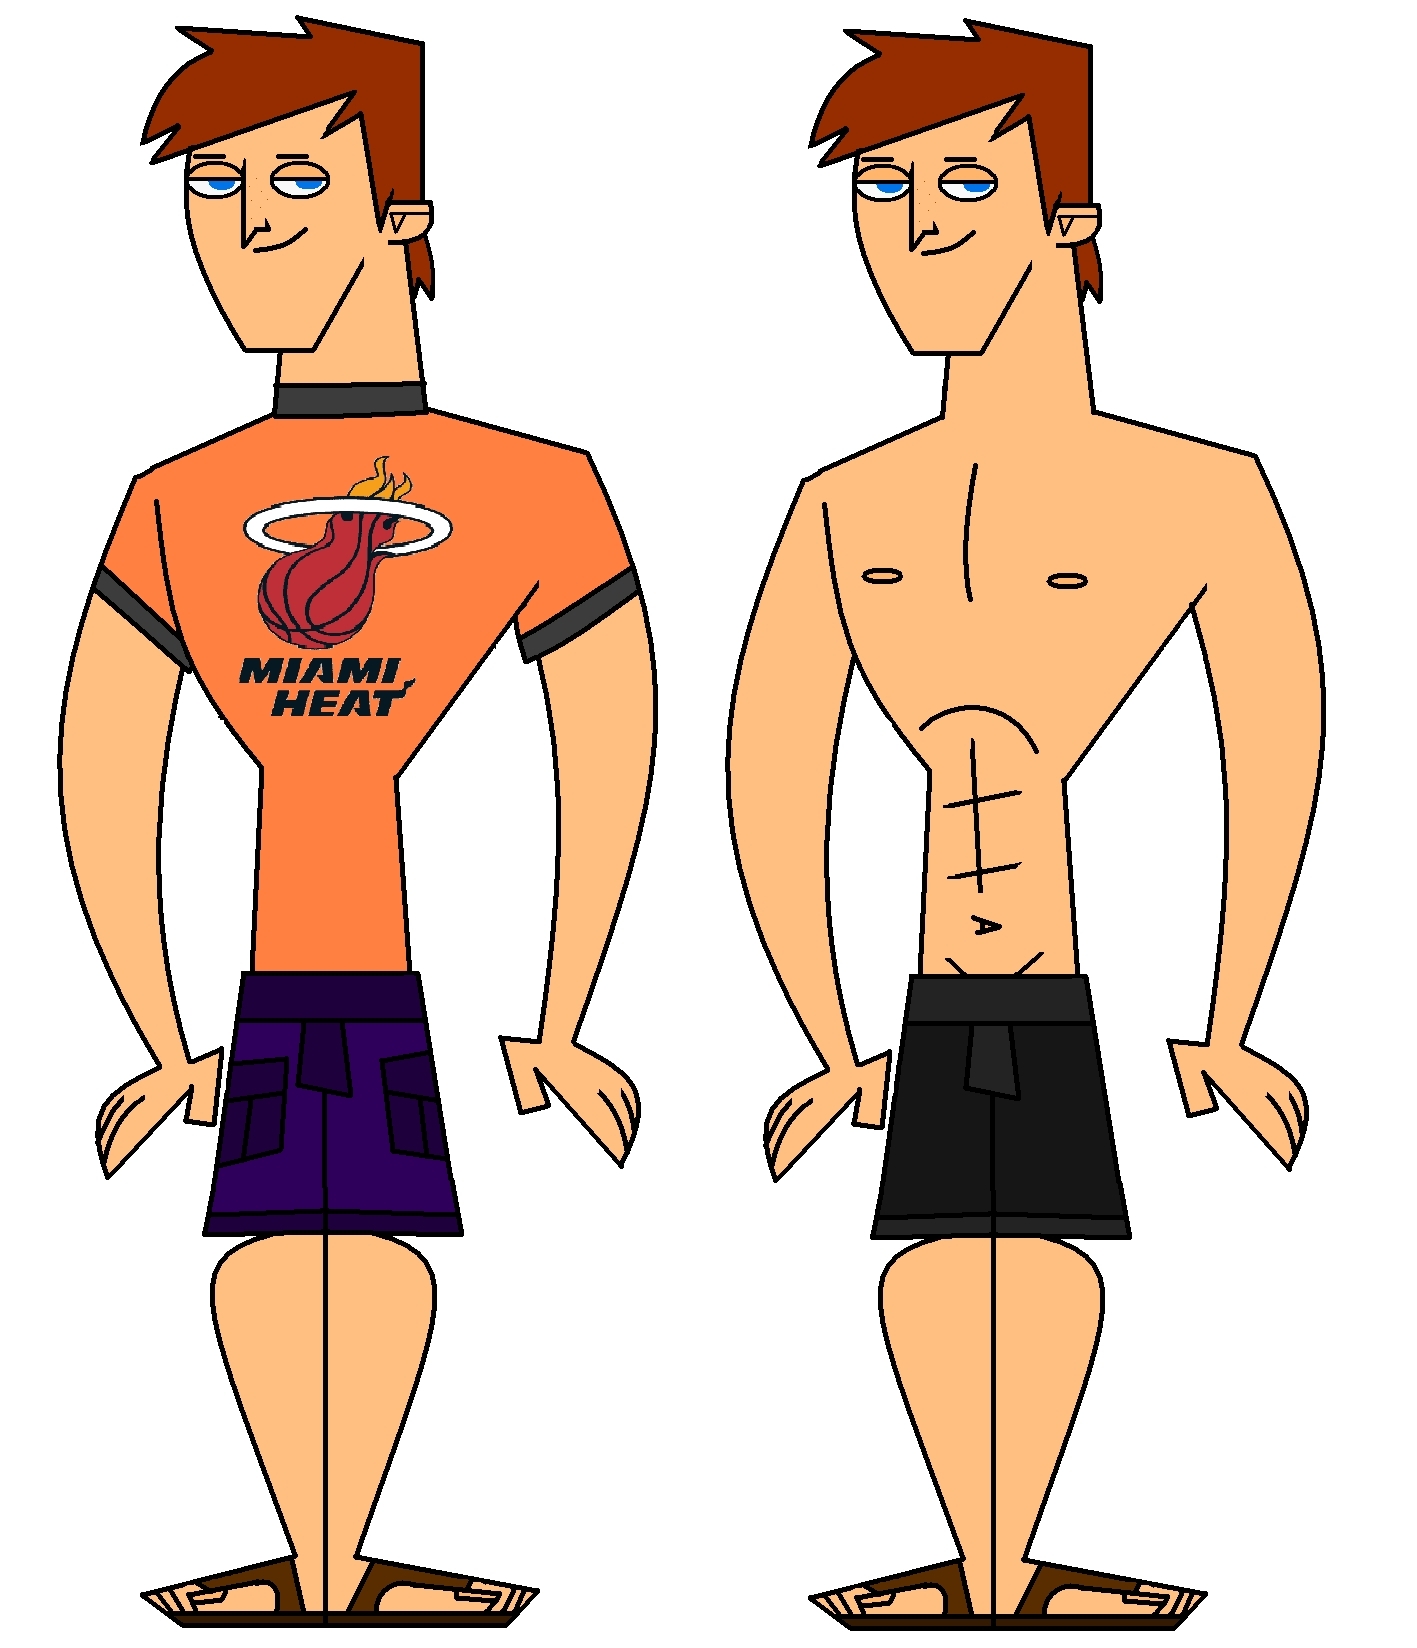 total drama island fancharacters, images, image, wallpaper, photos, photo, ...